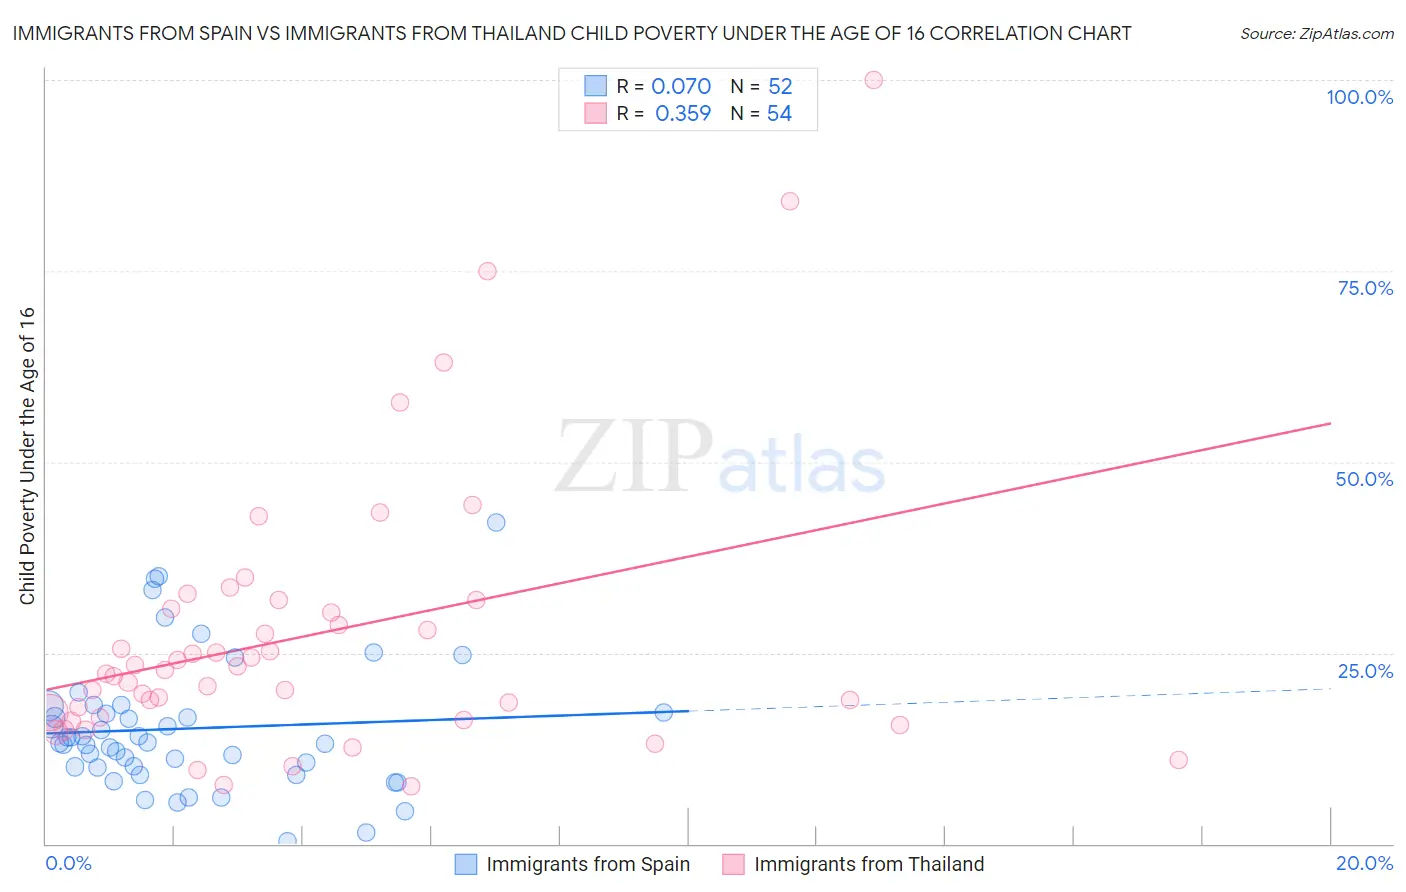 Immigrants from Spain vs Immigrants from Thailand Child Poverty Under the Age of 16